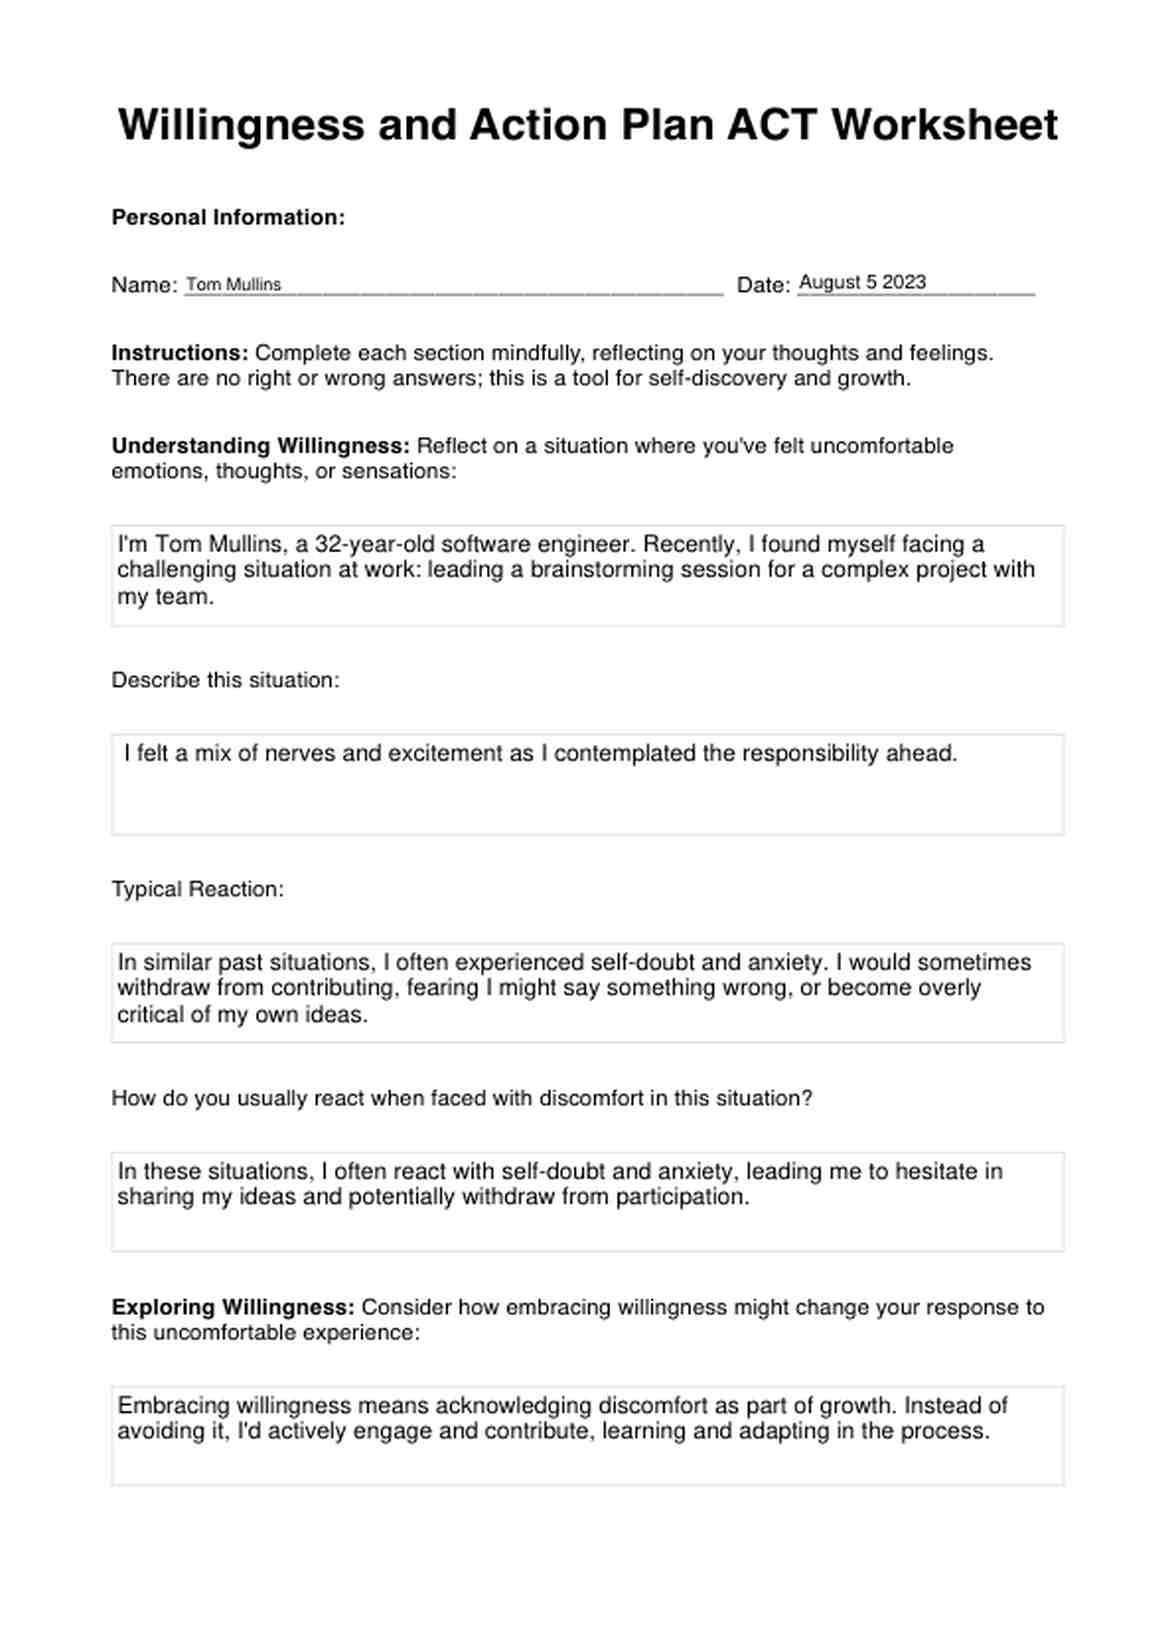 Willingness and Action Plan ACT Worksheet PDF Example